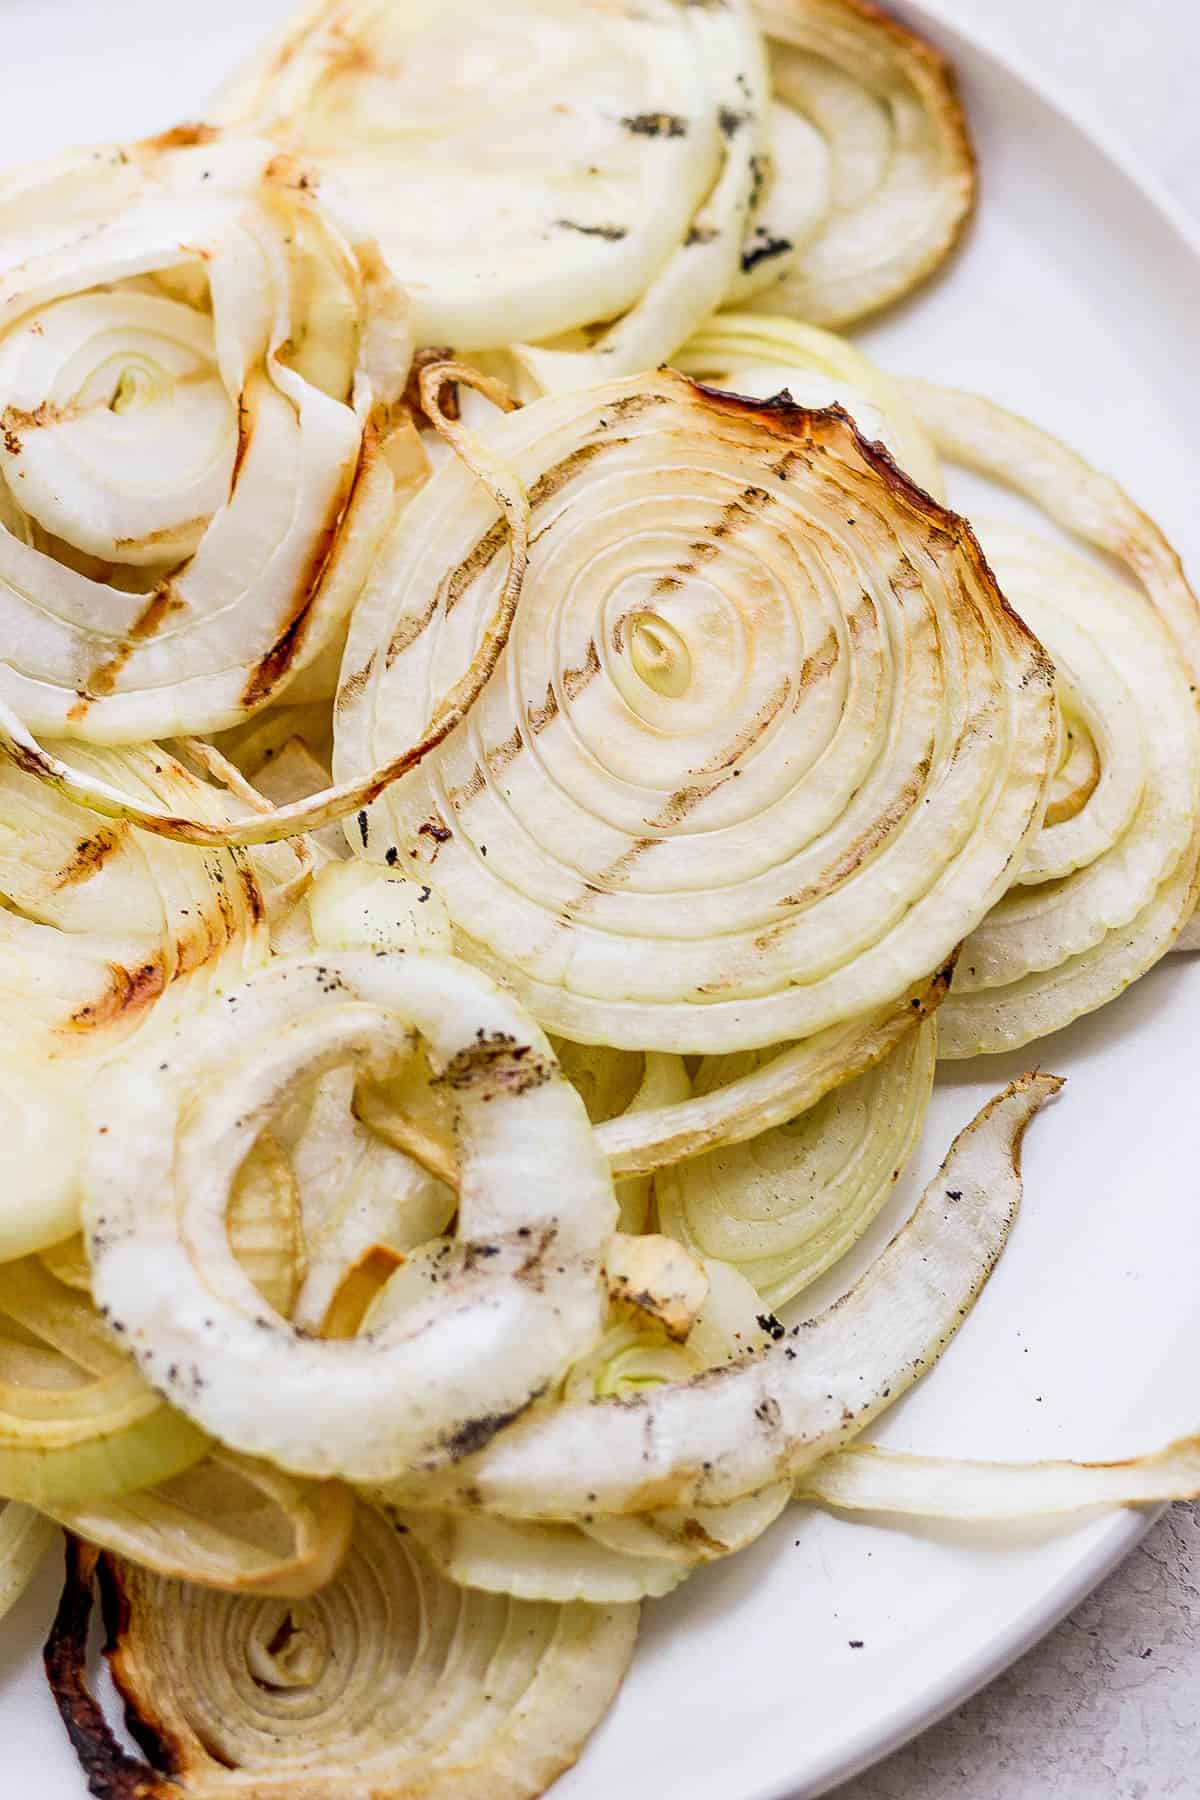 Smoked onions on a white plate.